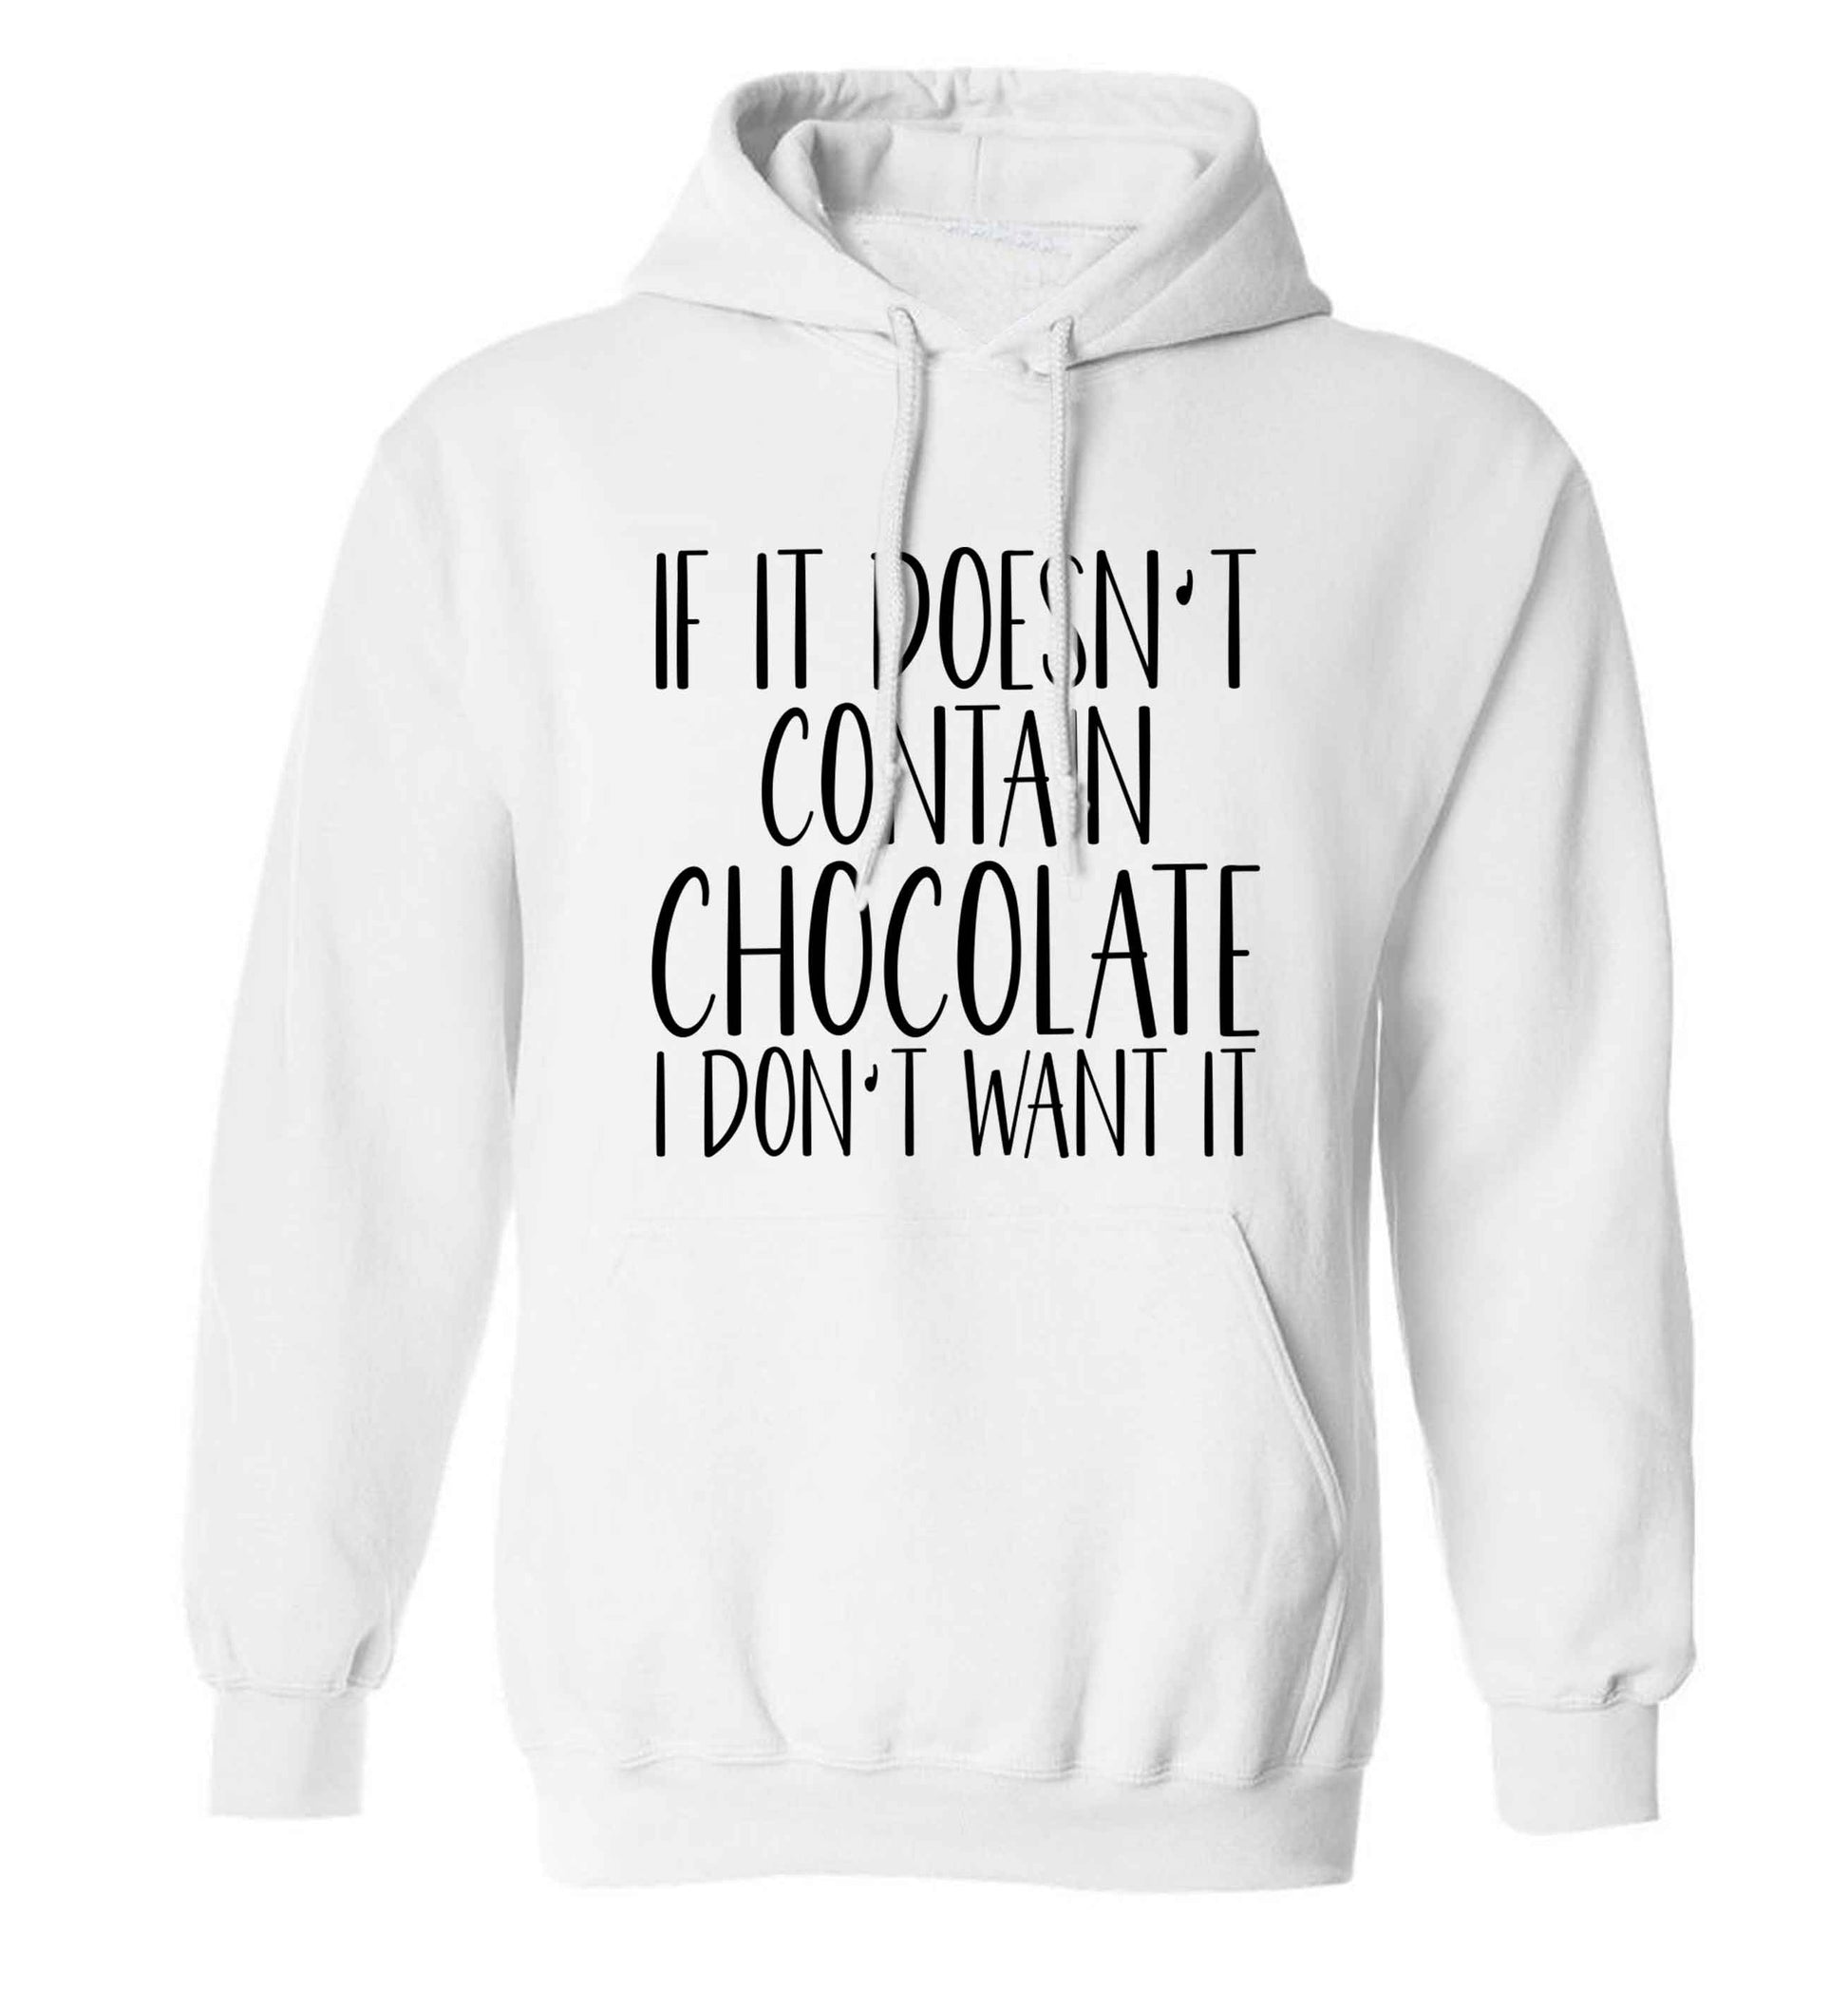 If it doesn't contain chocolate I don't want it adults unisex white hoodie 2XL